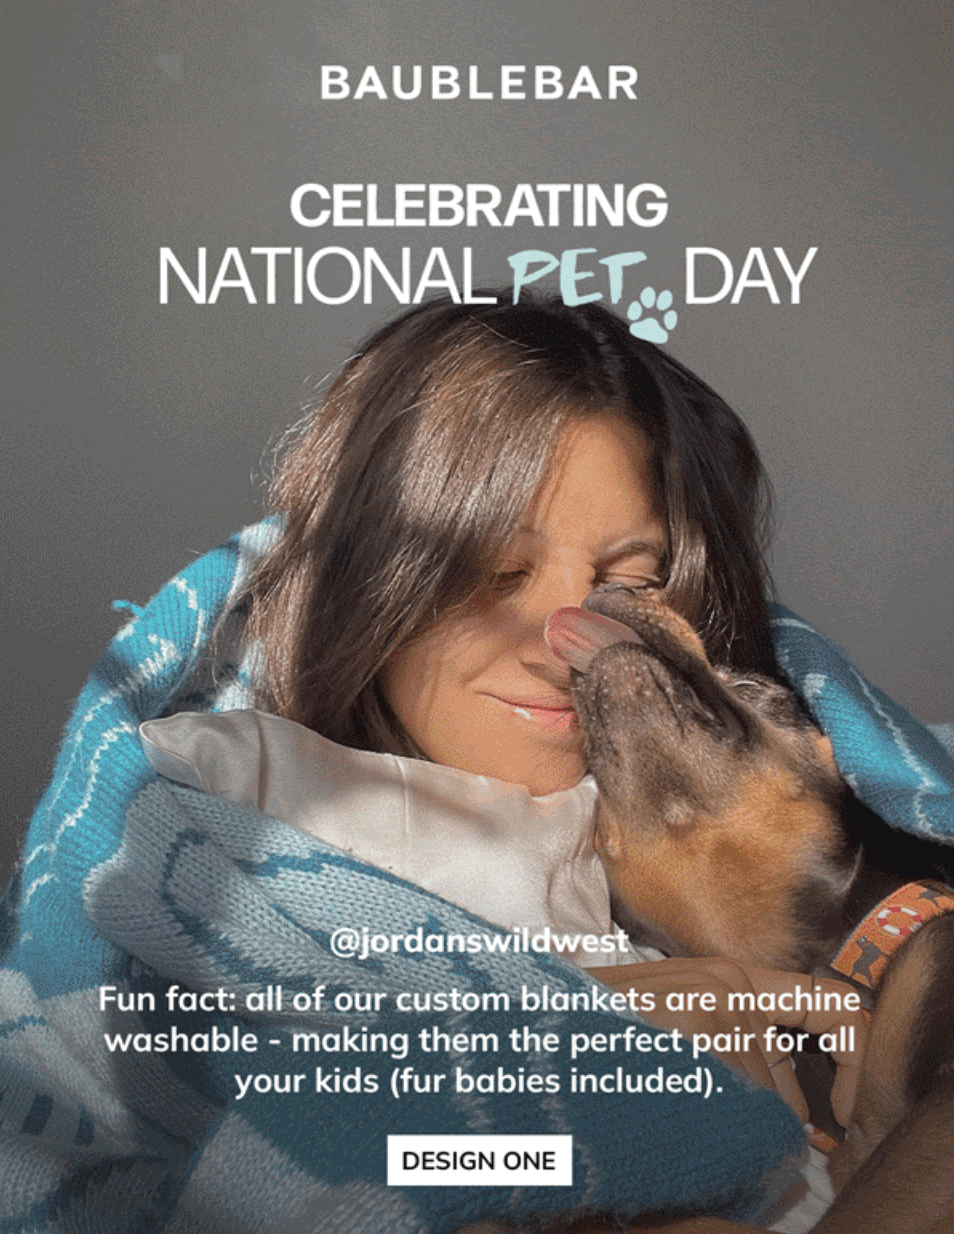 Email example for National Pet Day